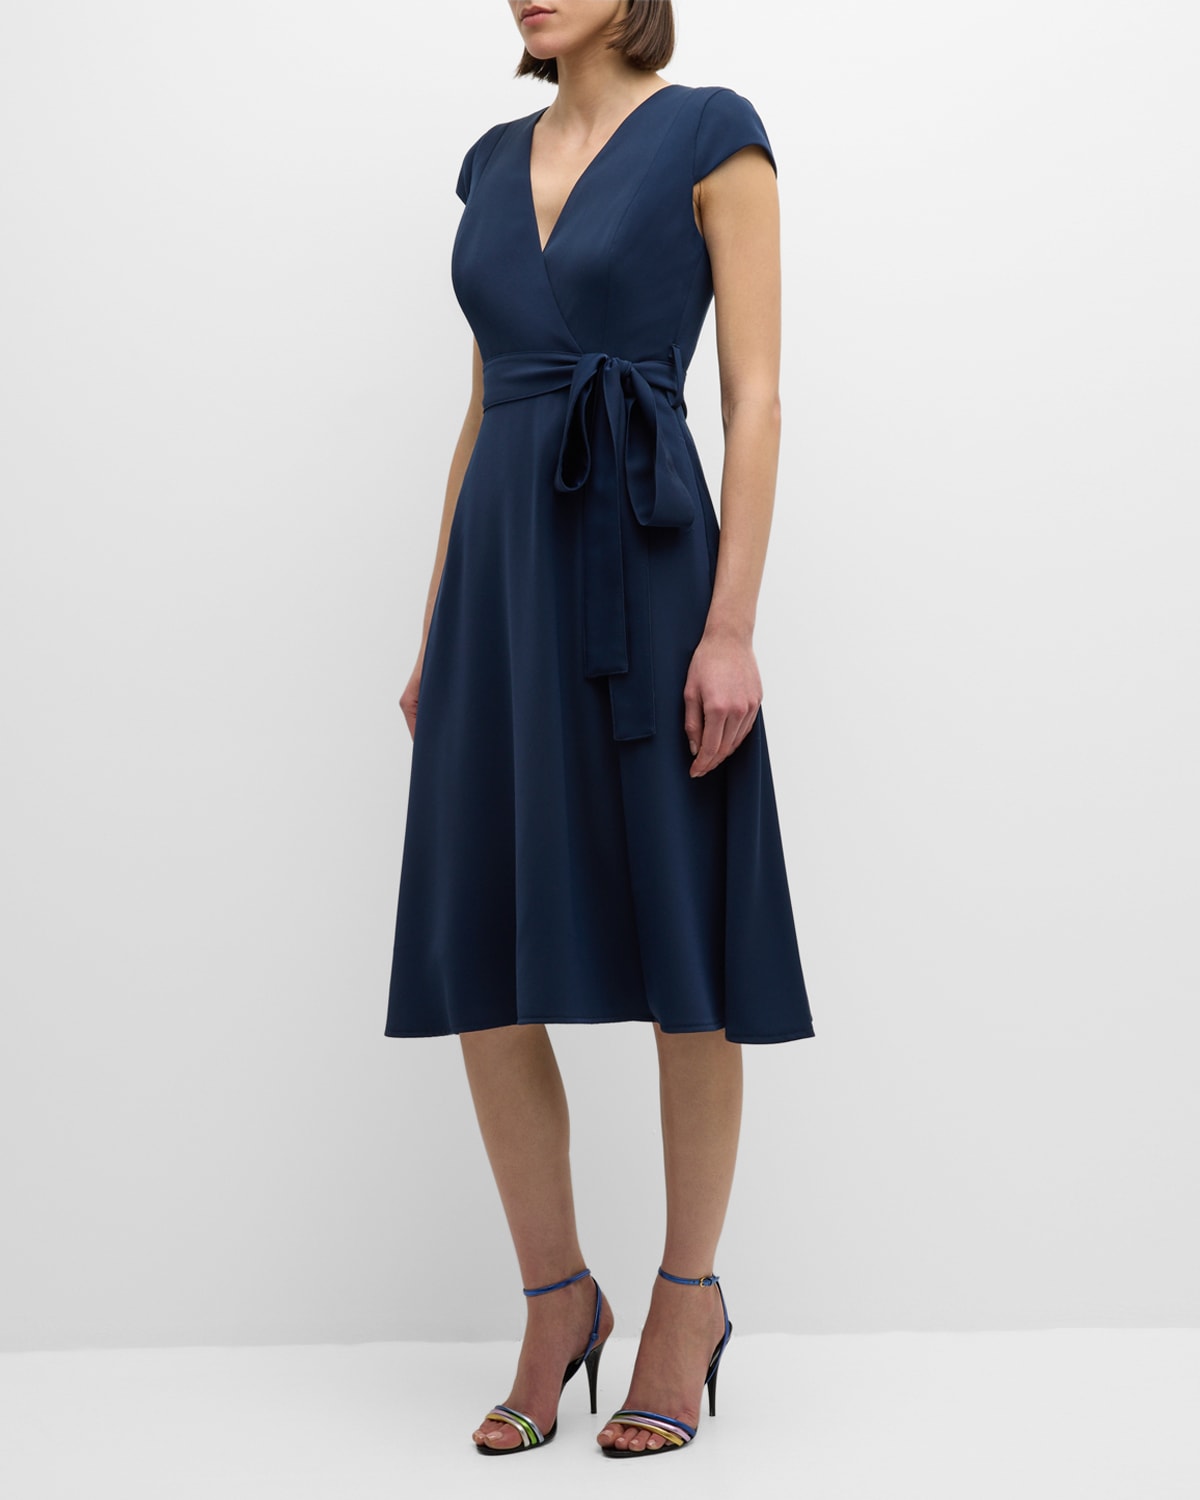 Black Halo Pandora Tailored Short A-line Dress With Belt In Pacific Blue